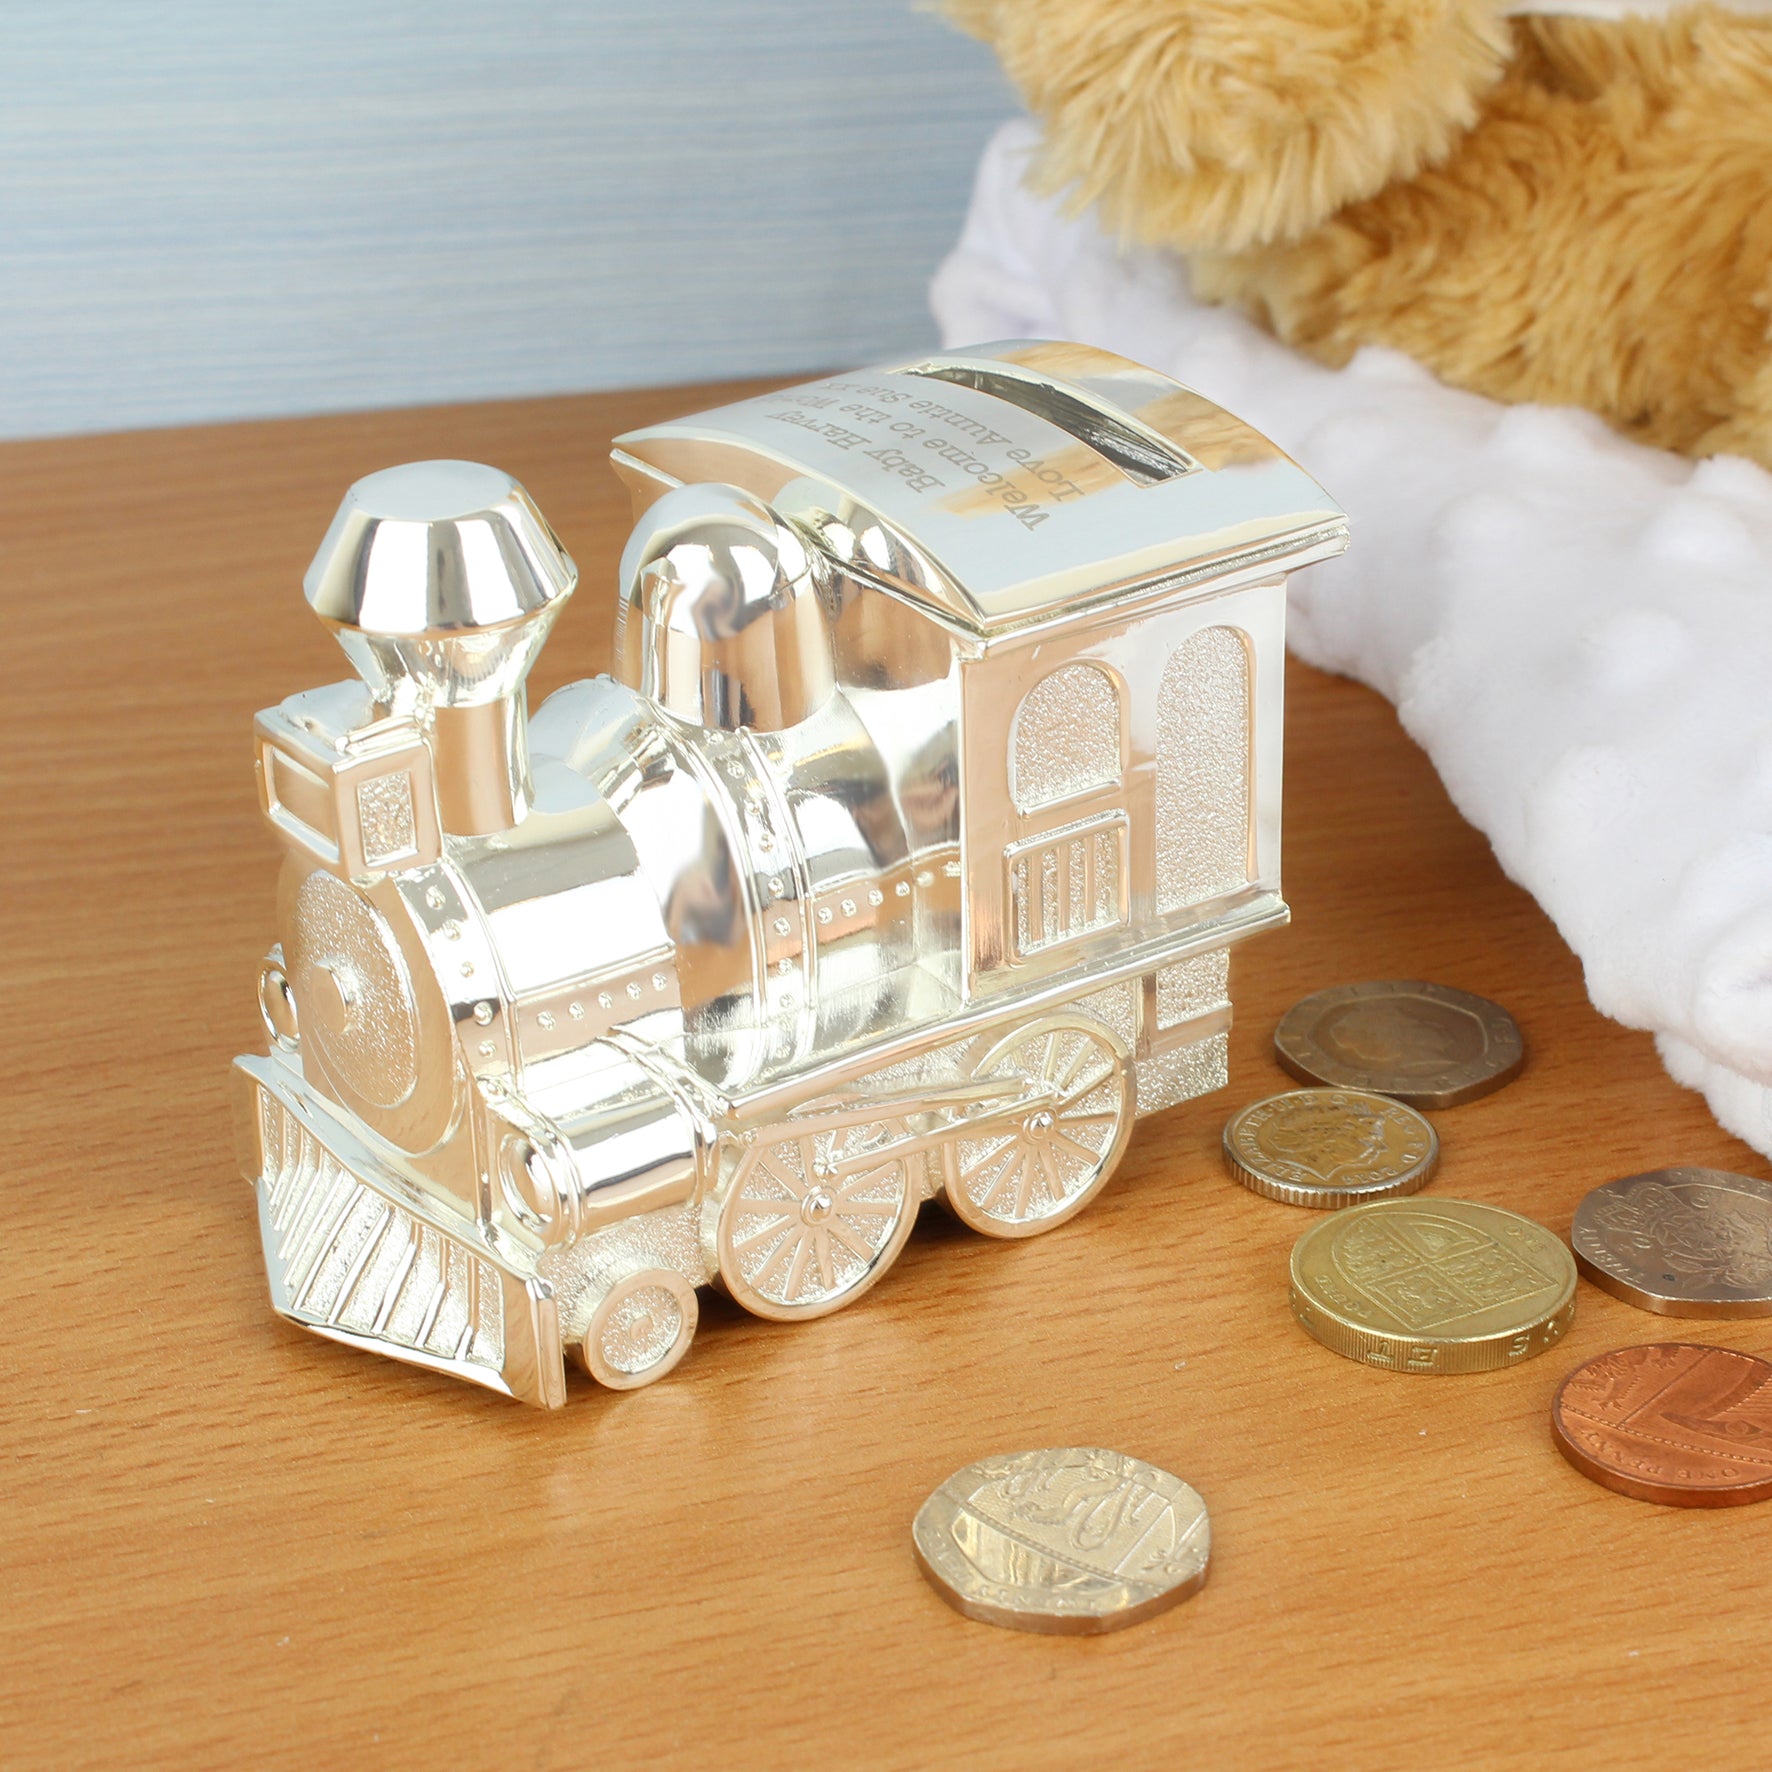 Personalised Silver Plated Train Money Box